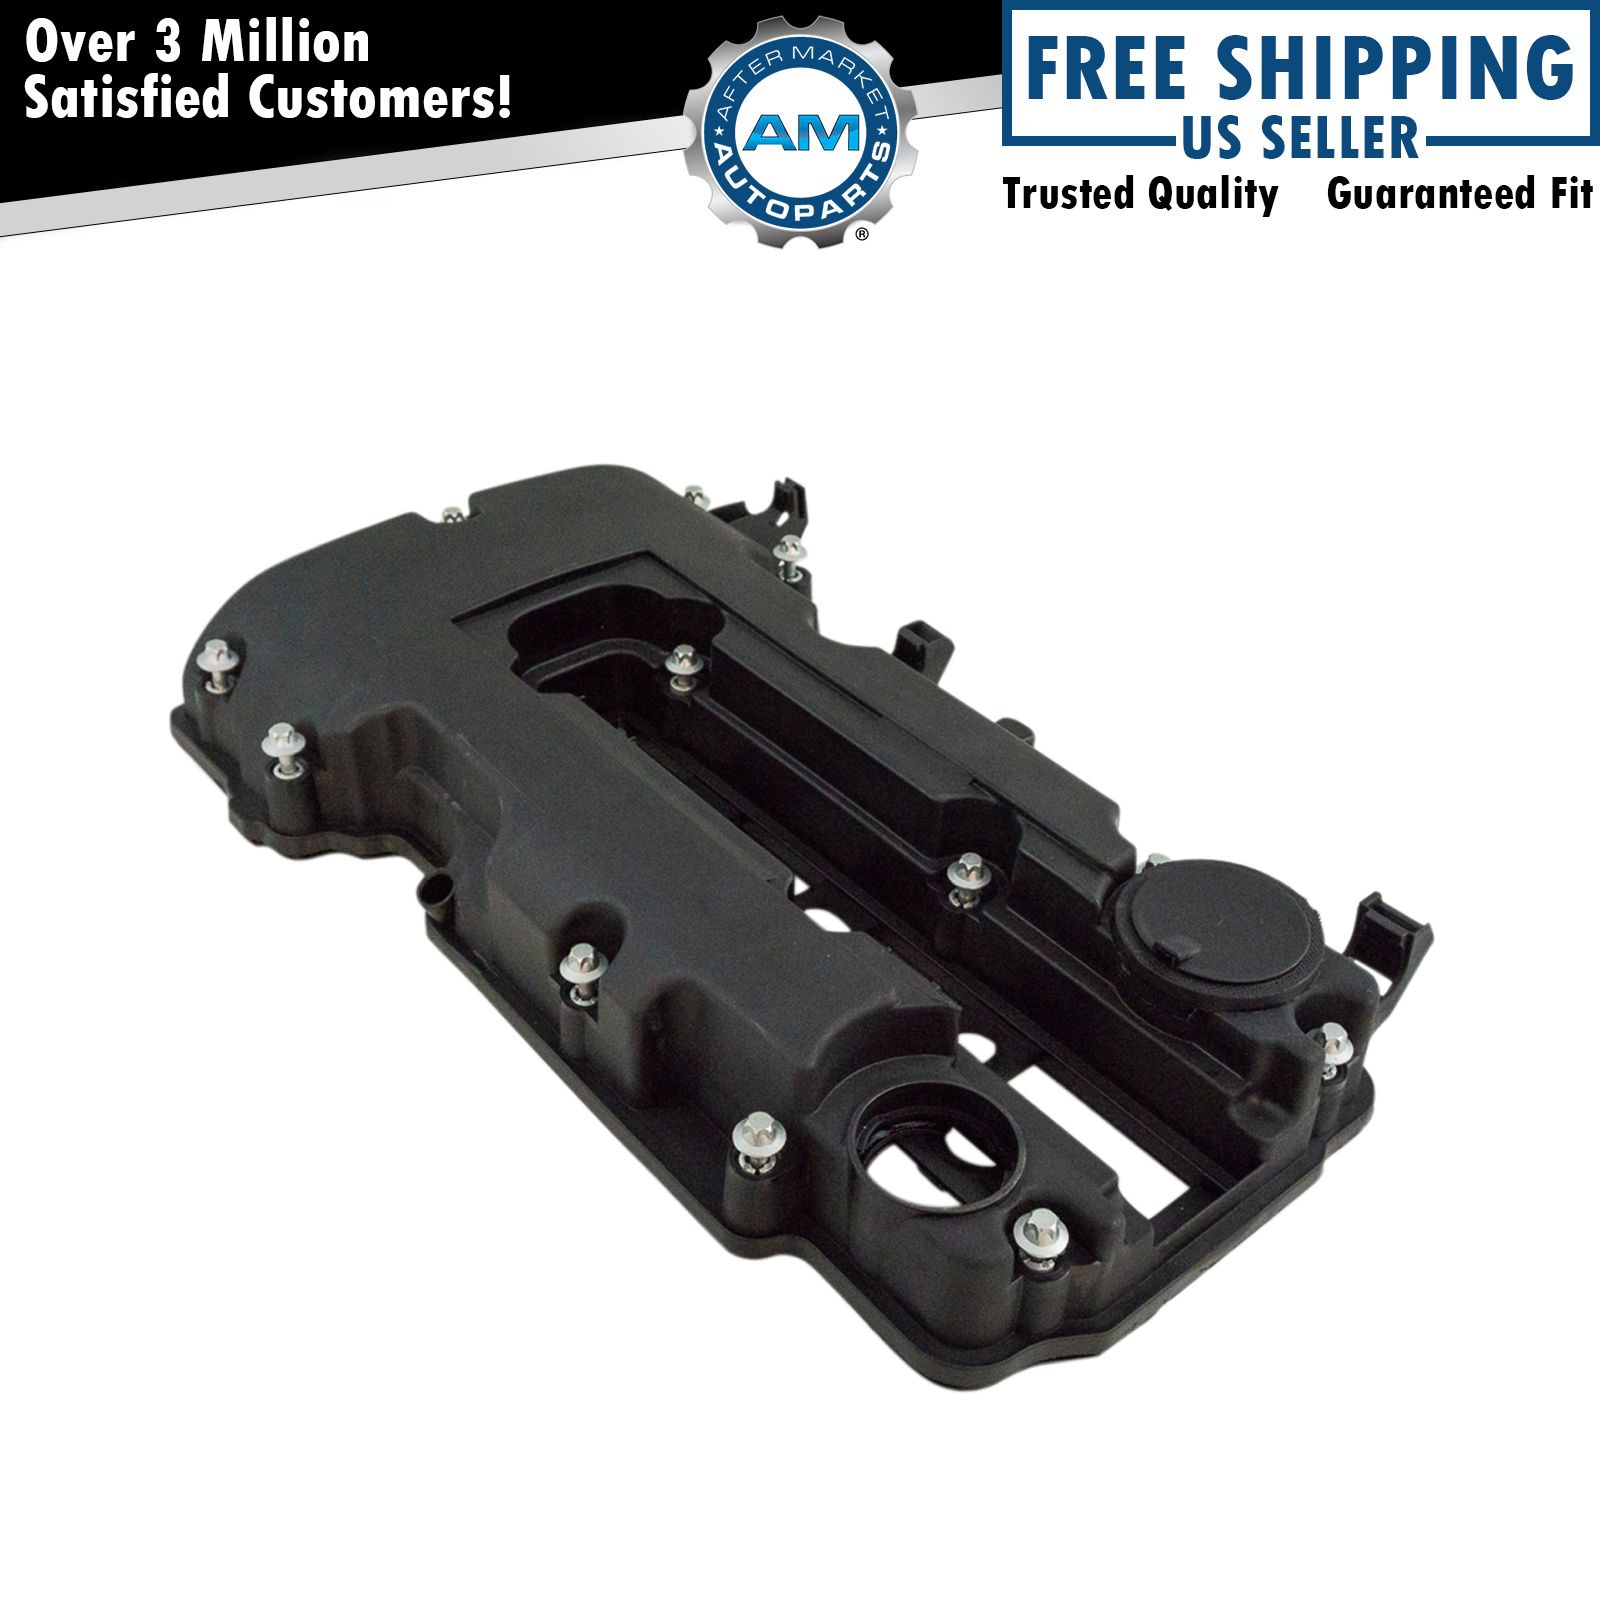 Valve Cover with Gasket & Bolt Kit for Chevy Cruze Encore Volt Trax